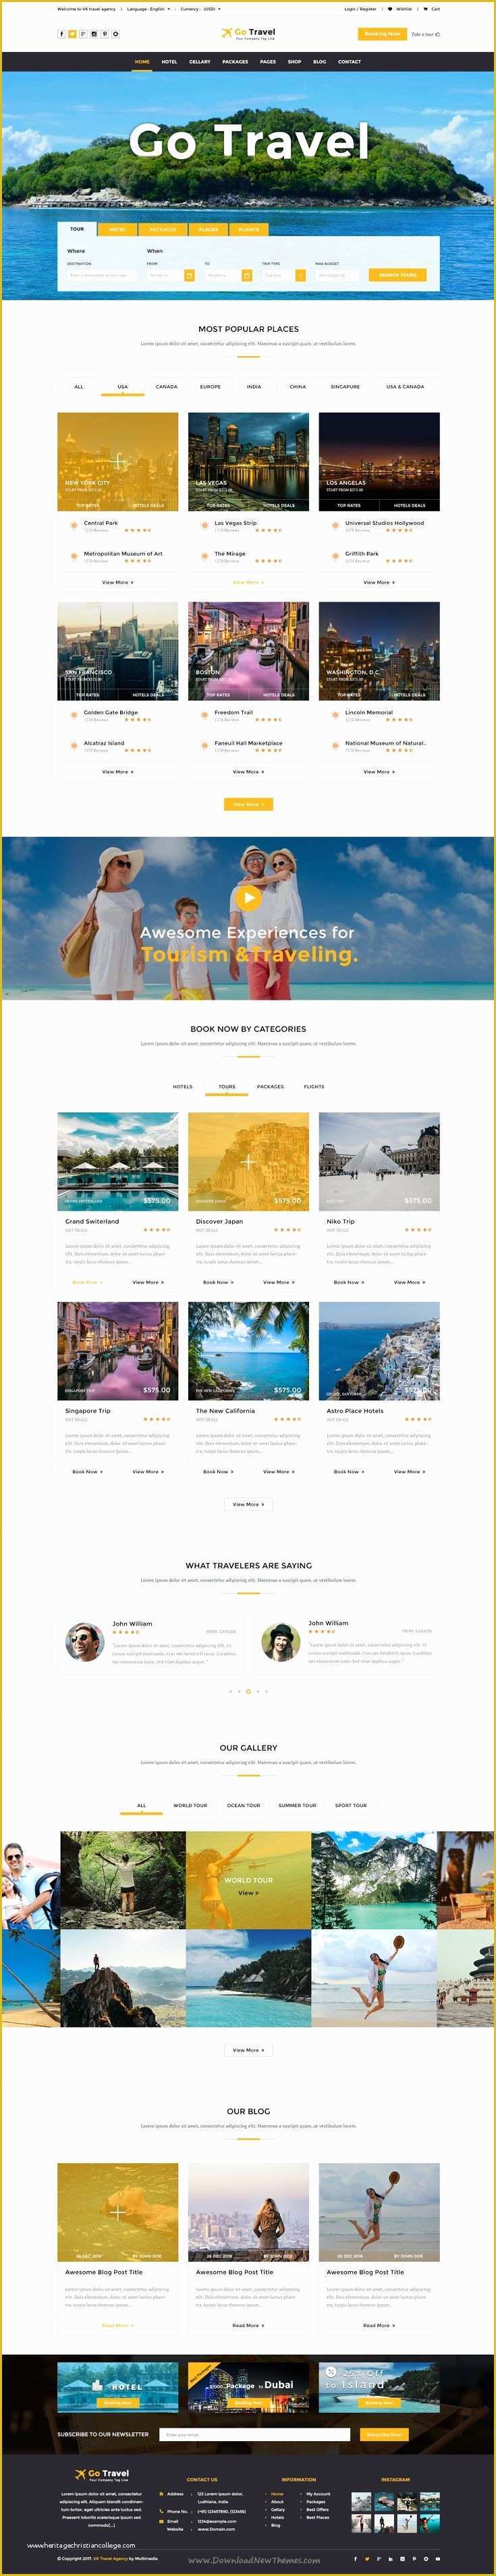 Travel Booking Website Templates Free Download Of Die Besten 25 Travel Website Templates Ideen Auf